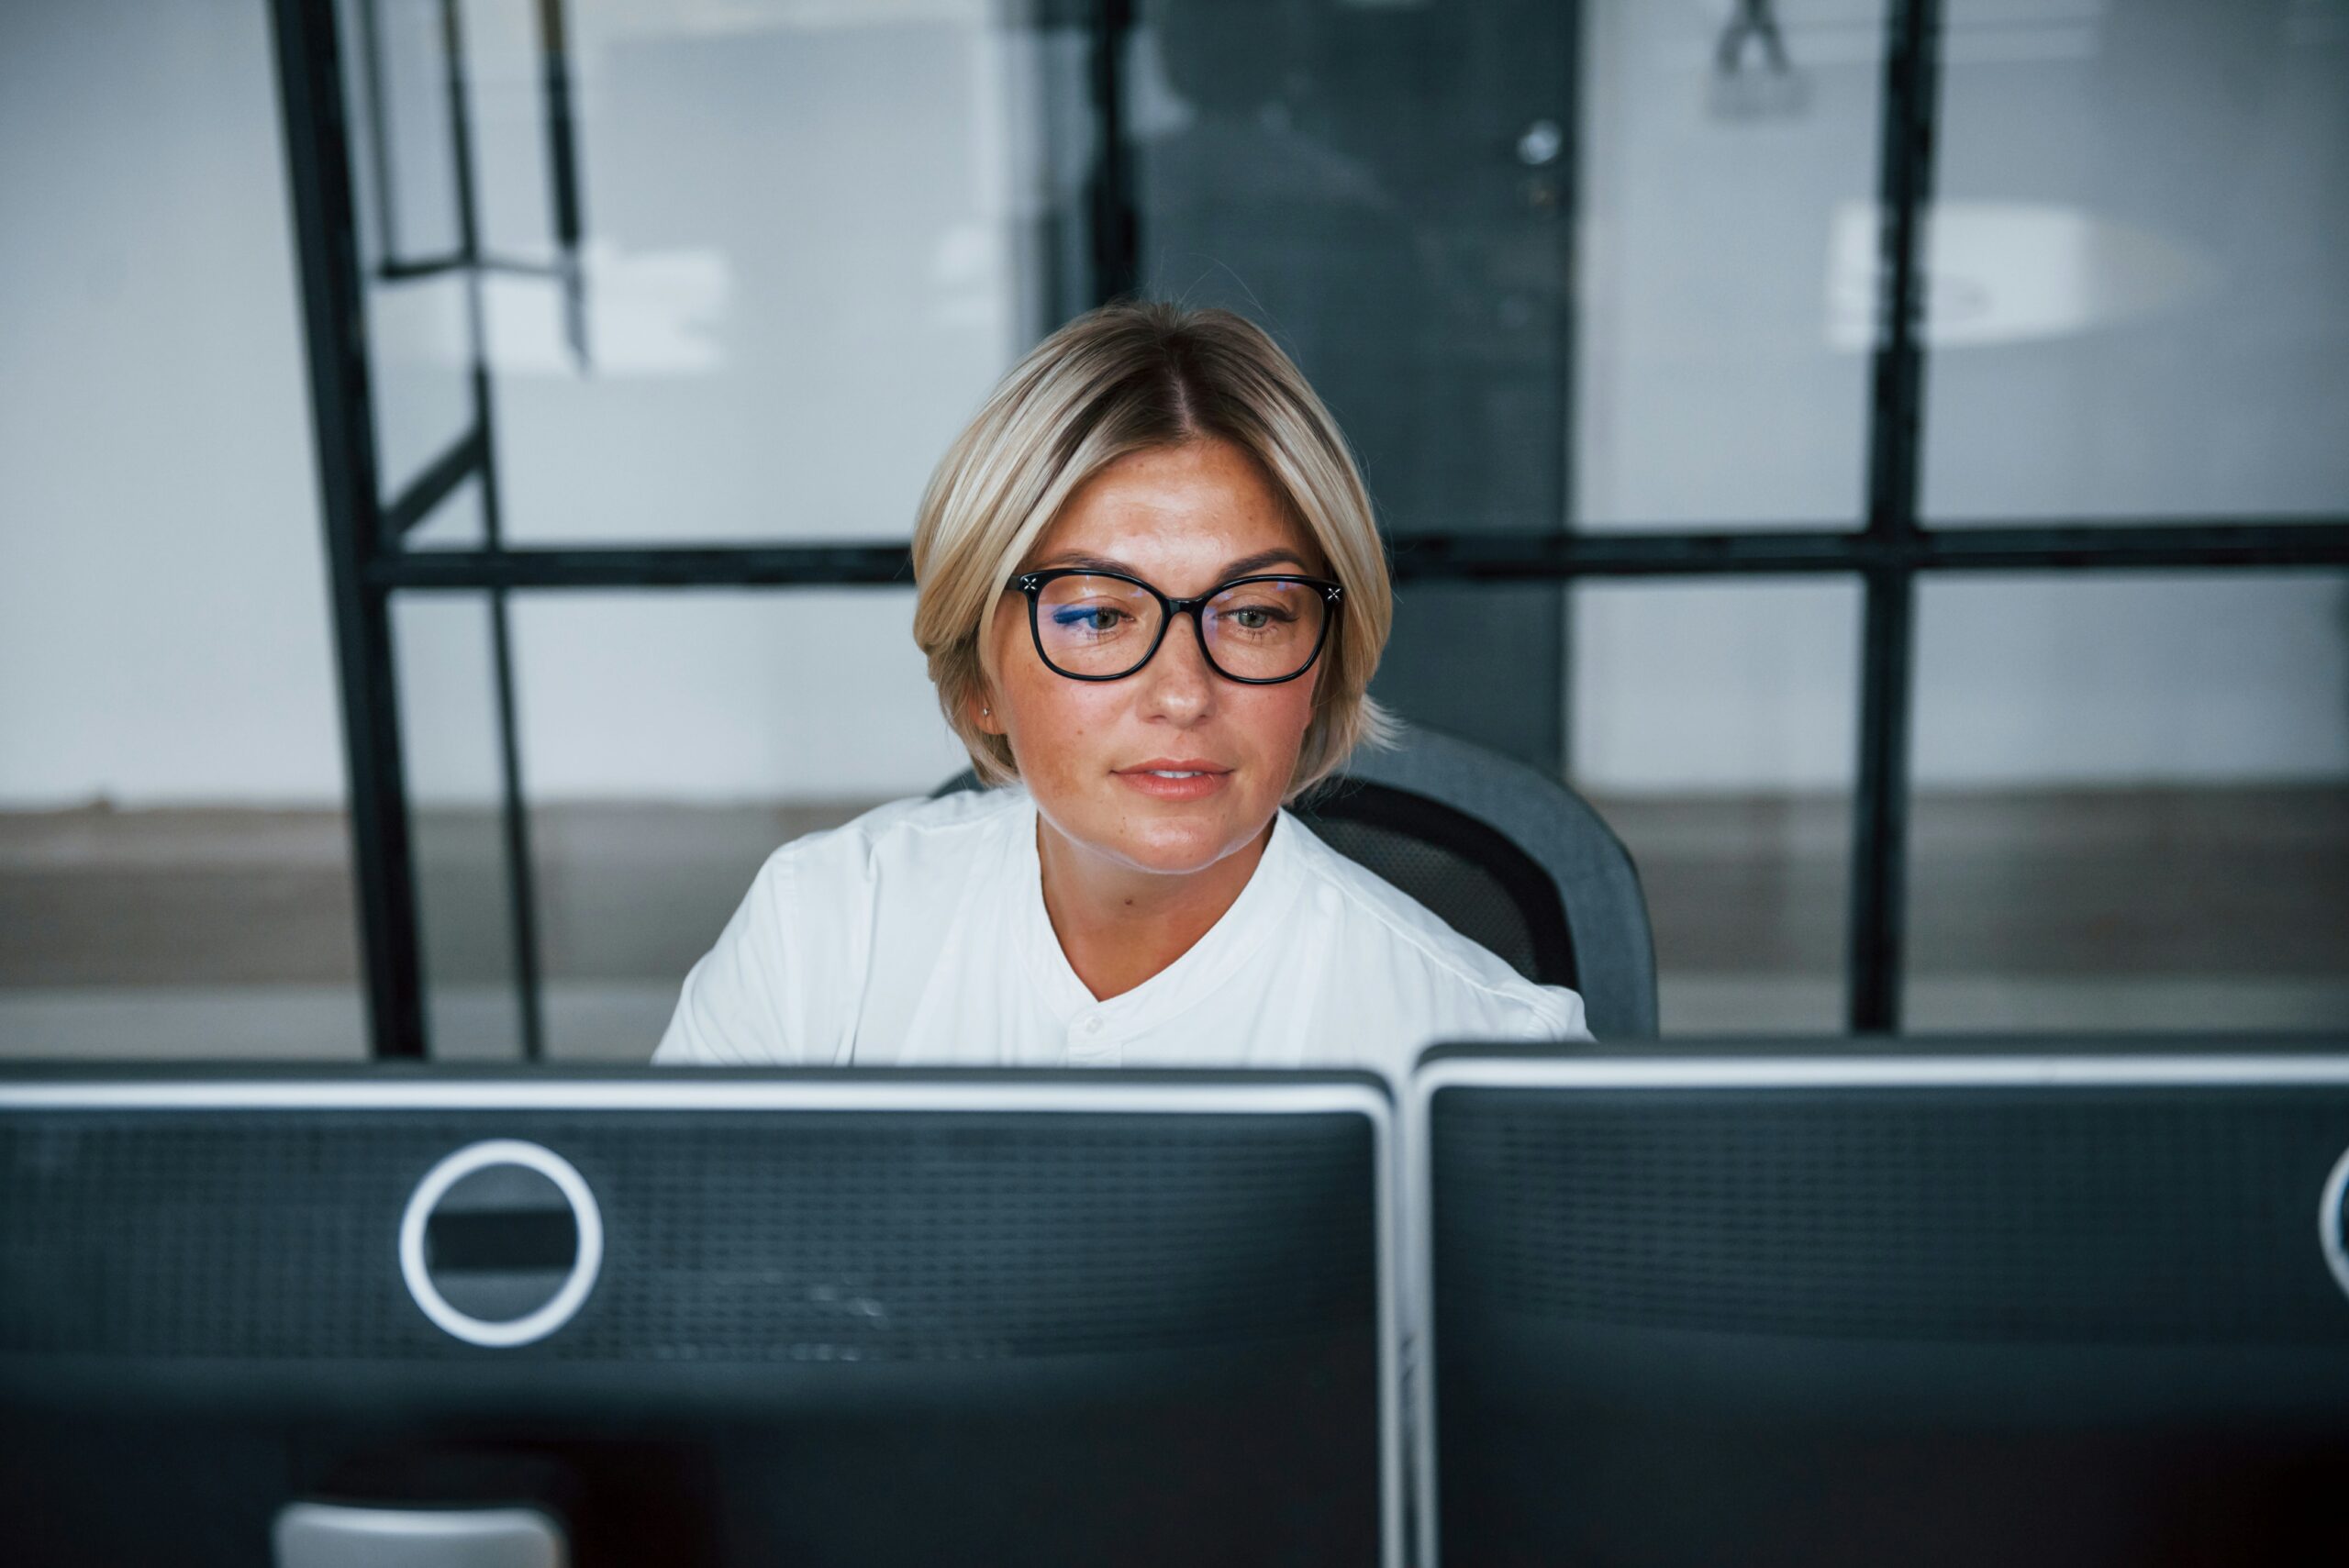 A focused woman with glasses sitting at a desk with dual monitor screens in a modern managed IT services office setting.